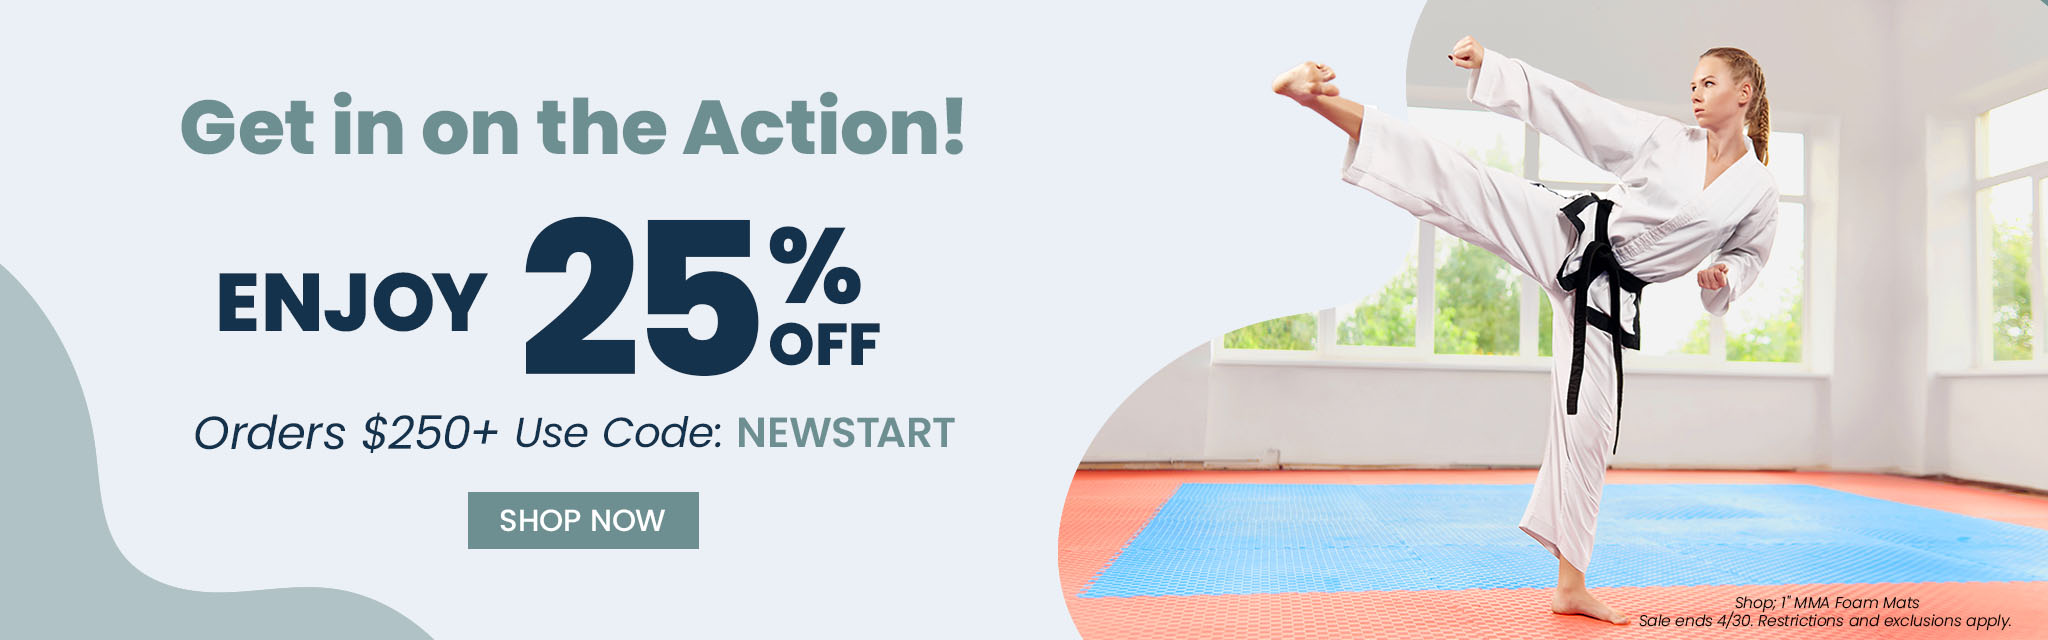 Get in on the Action! | Enjoy 25% Off Orders $250+ With Code: NEWSTART | Shop Now
 *Ends 4/30. Restrictions and exclusions apply. 